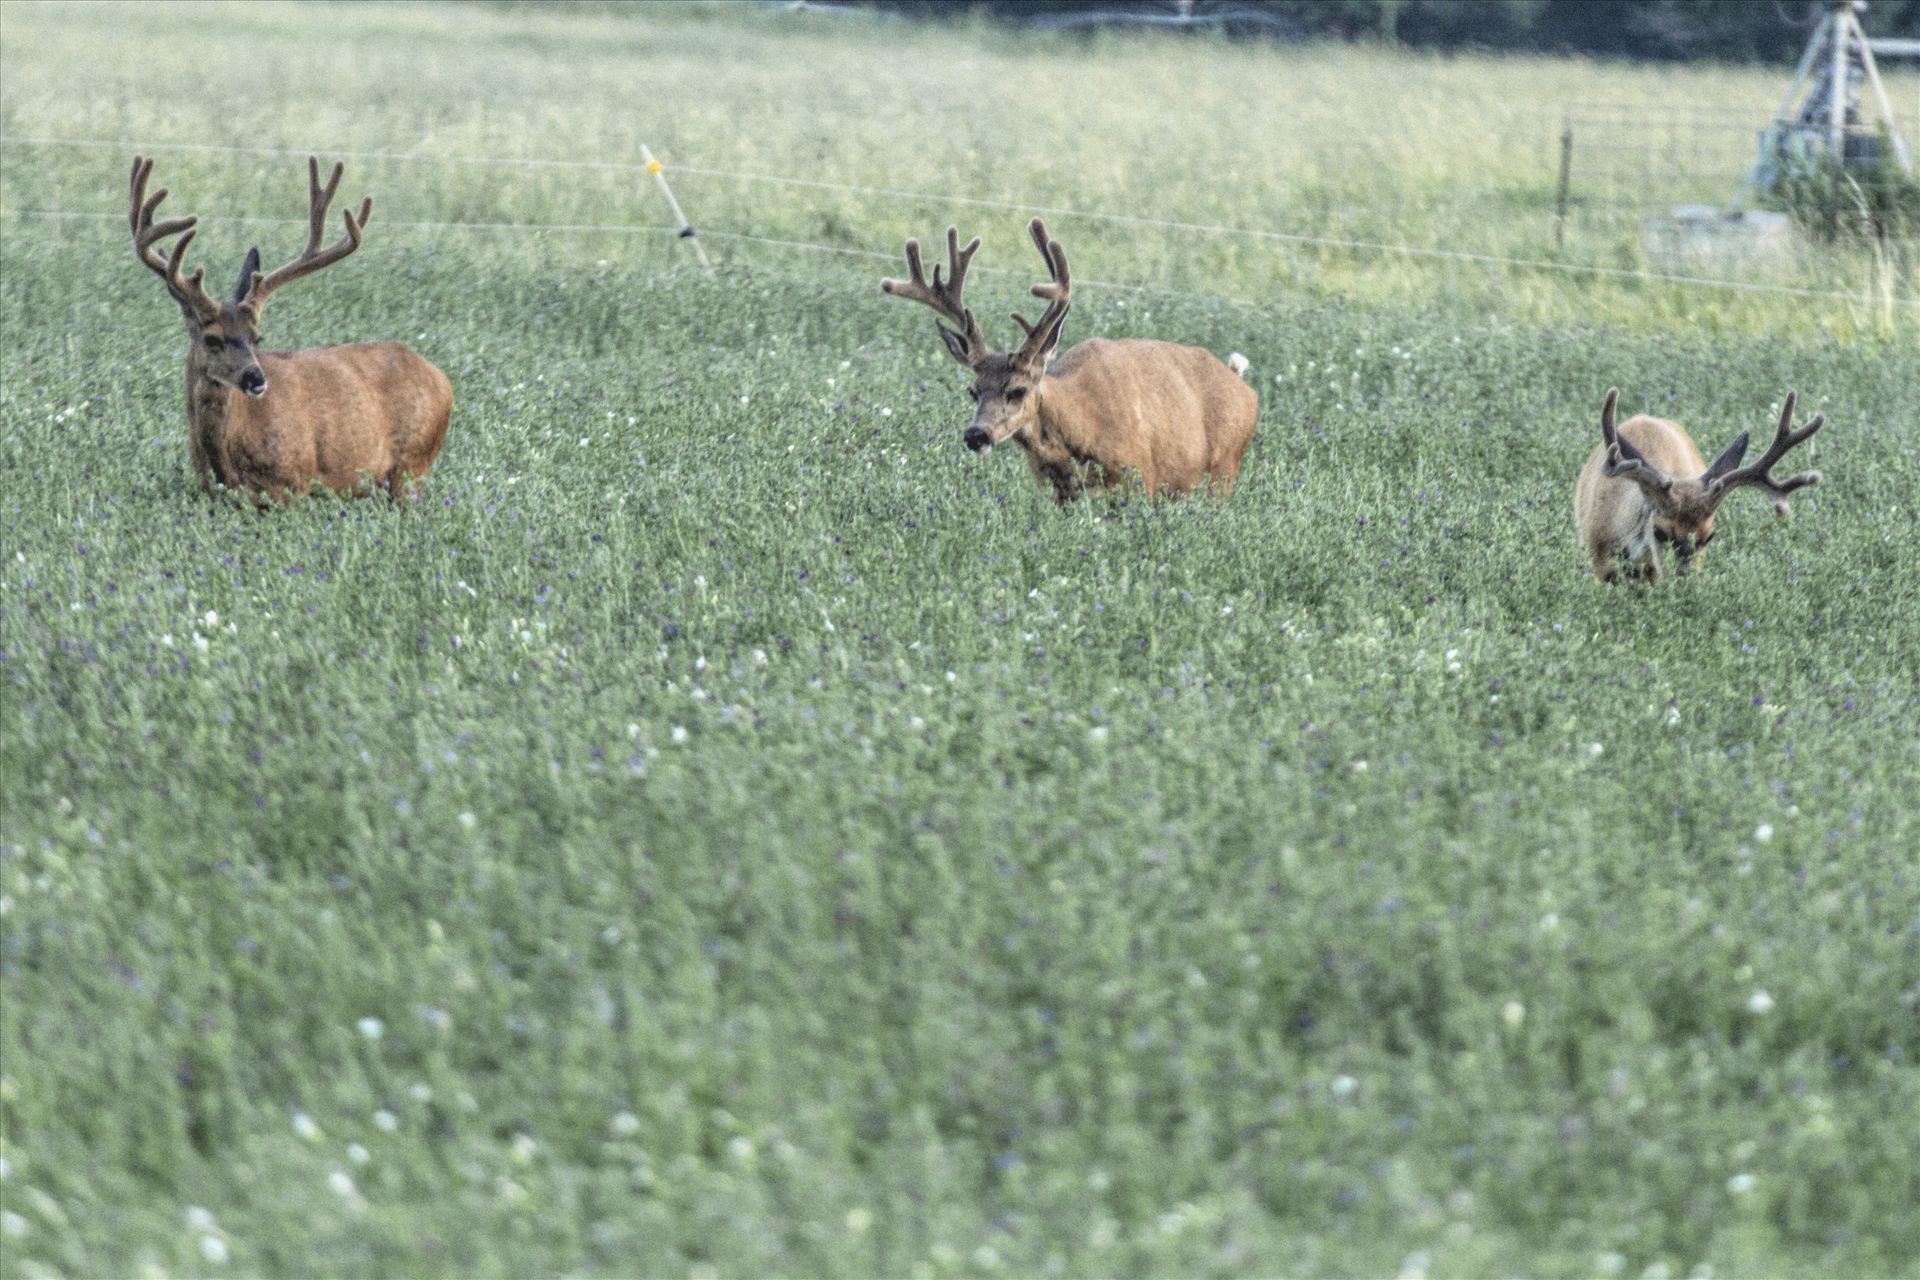 Farm Land Bucks - Every chance these bucks get, they are standing in the middle of some of the best alfalfa in the world, feeding and growing. by Bear Conceptions Photography